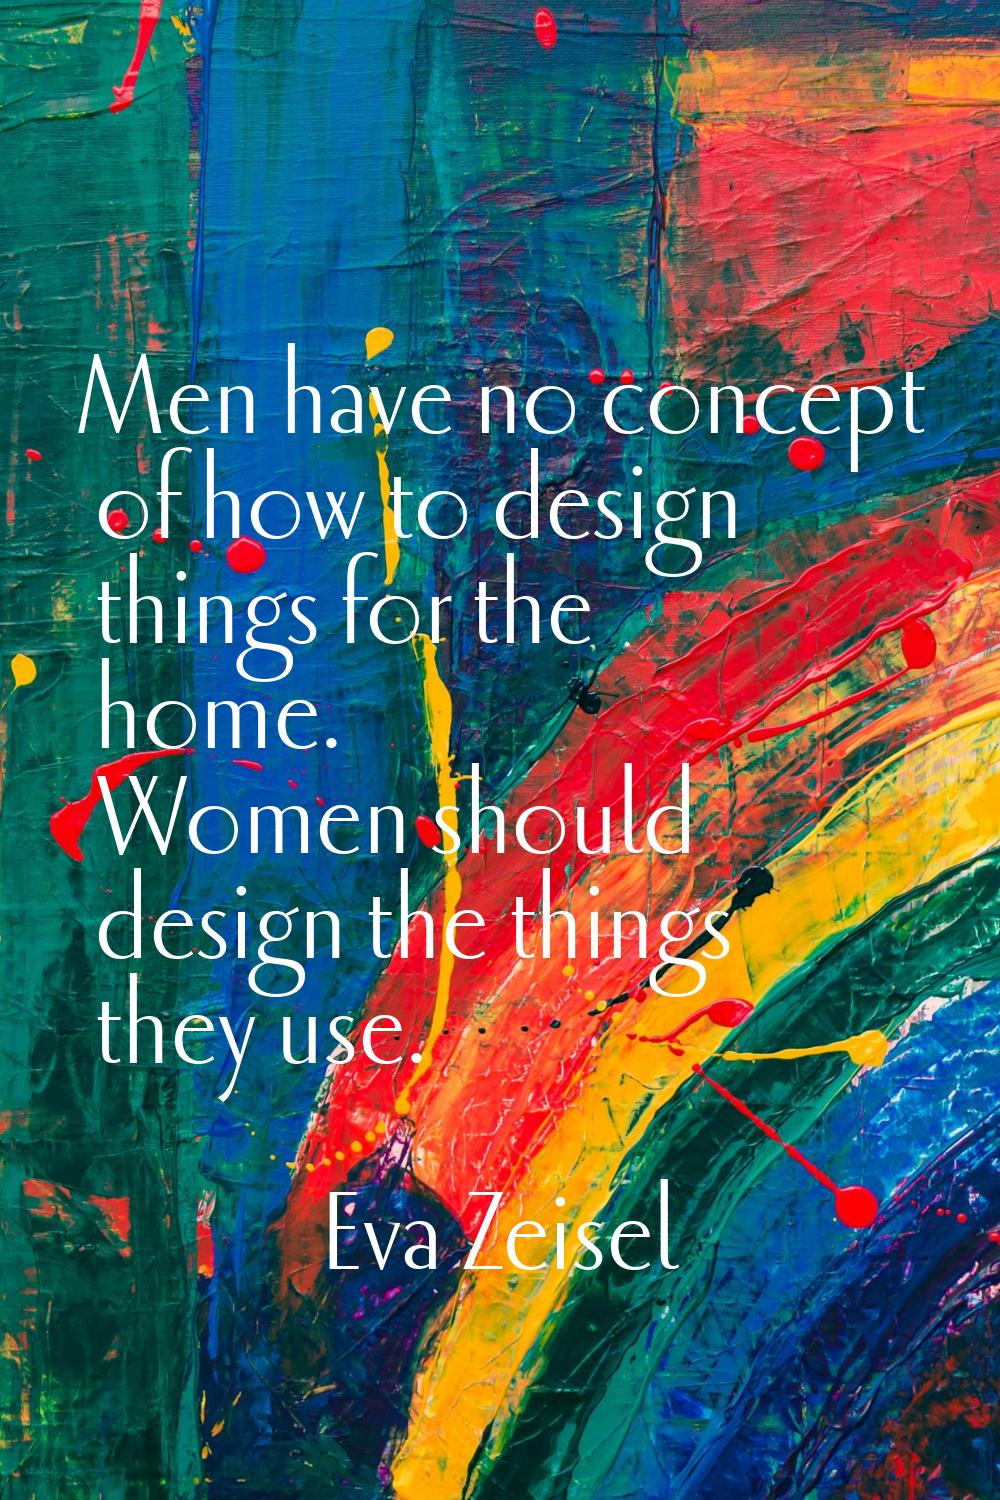 Men have no concept of how to design things for the home. Women should design the things they use.